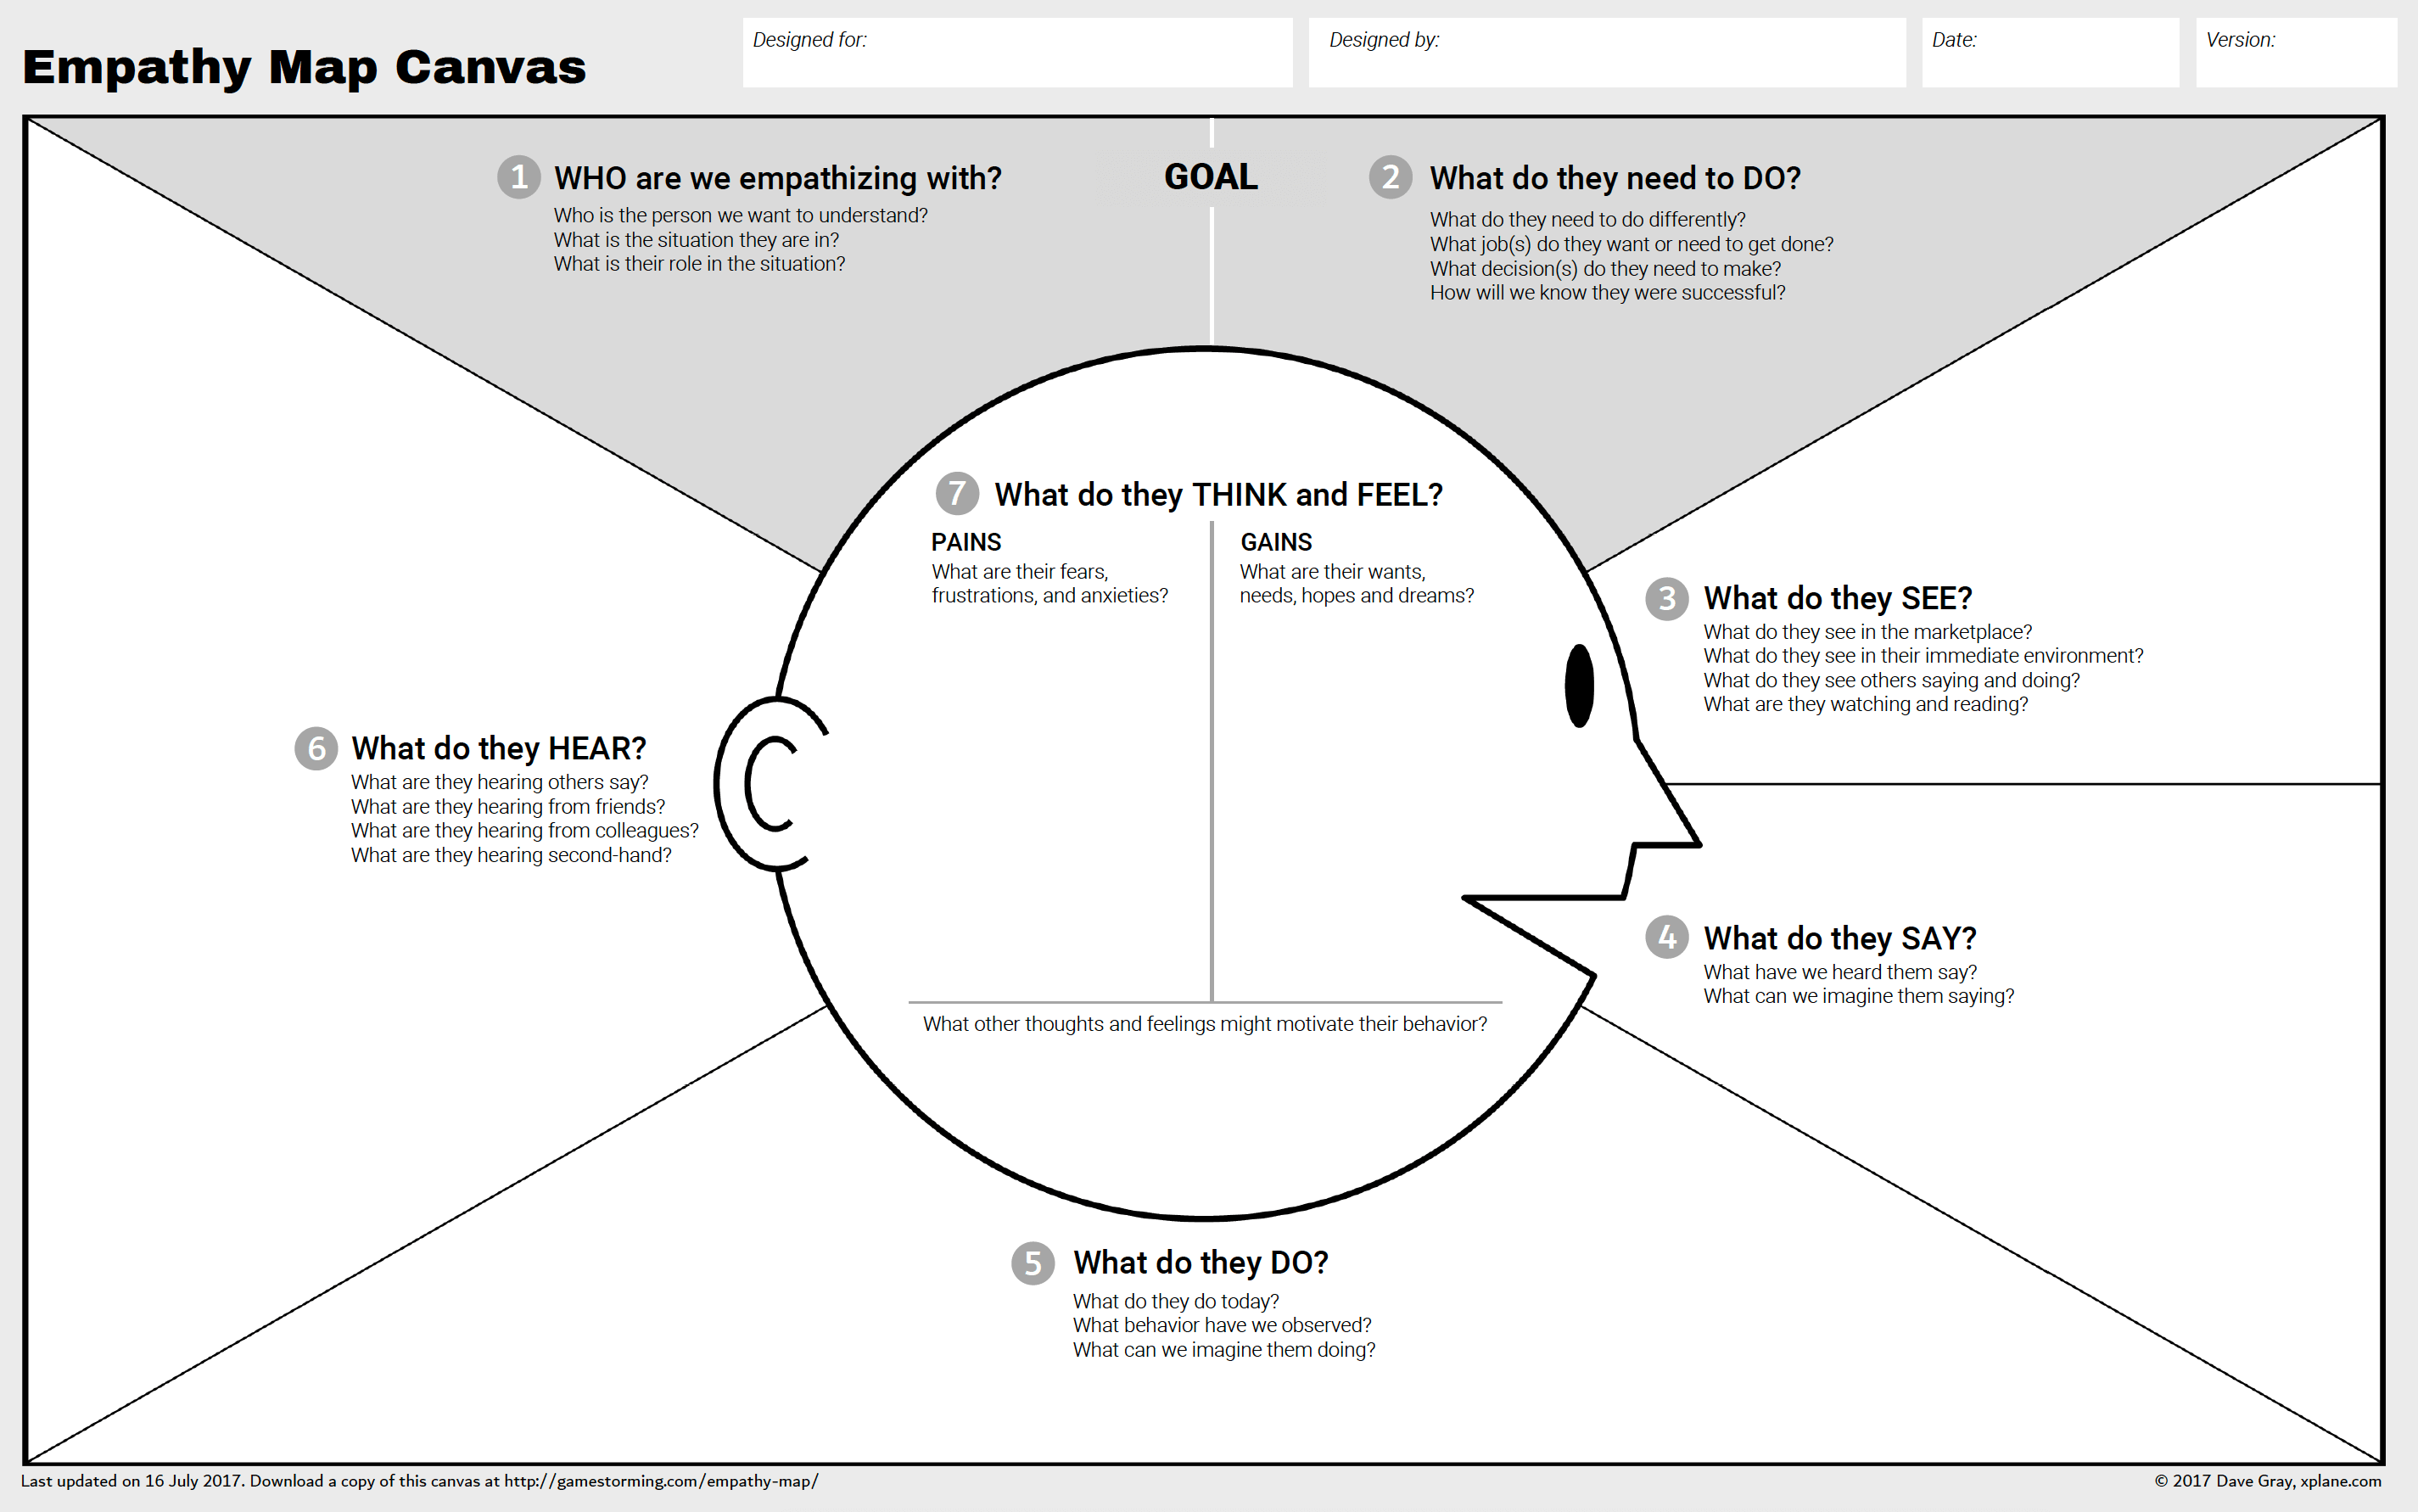 Empathy map that shows a users perceptions.